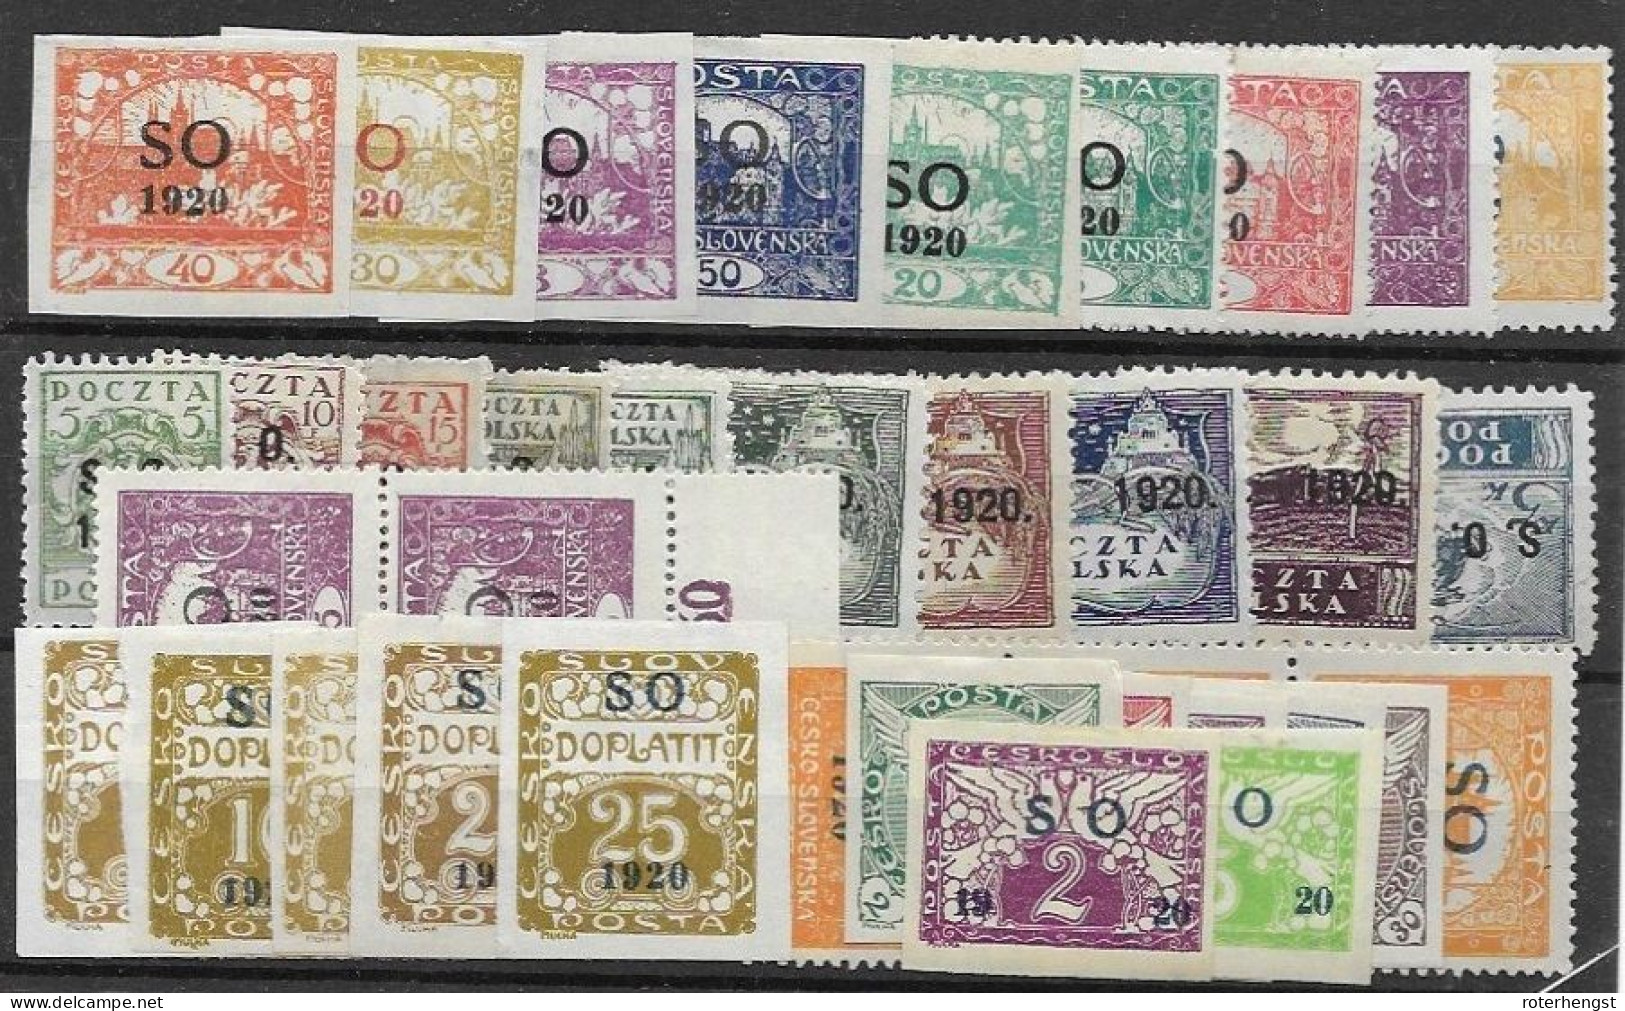 Silesia Schlesien Lot Mh * 10 Euros 1920 36 Stamps (5 Are Mnh **, 1 Has No Gum) - Silésie